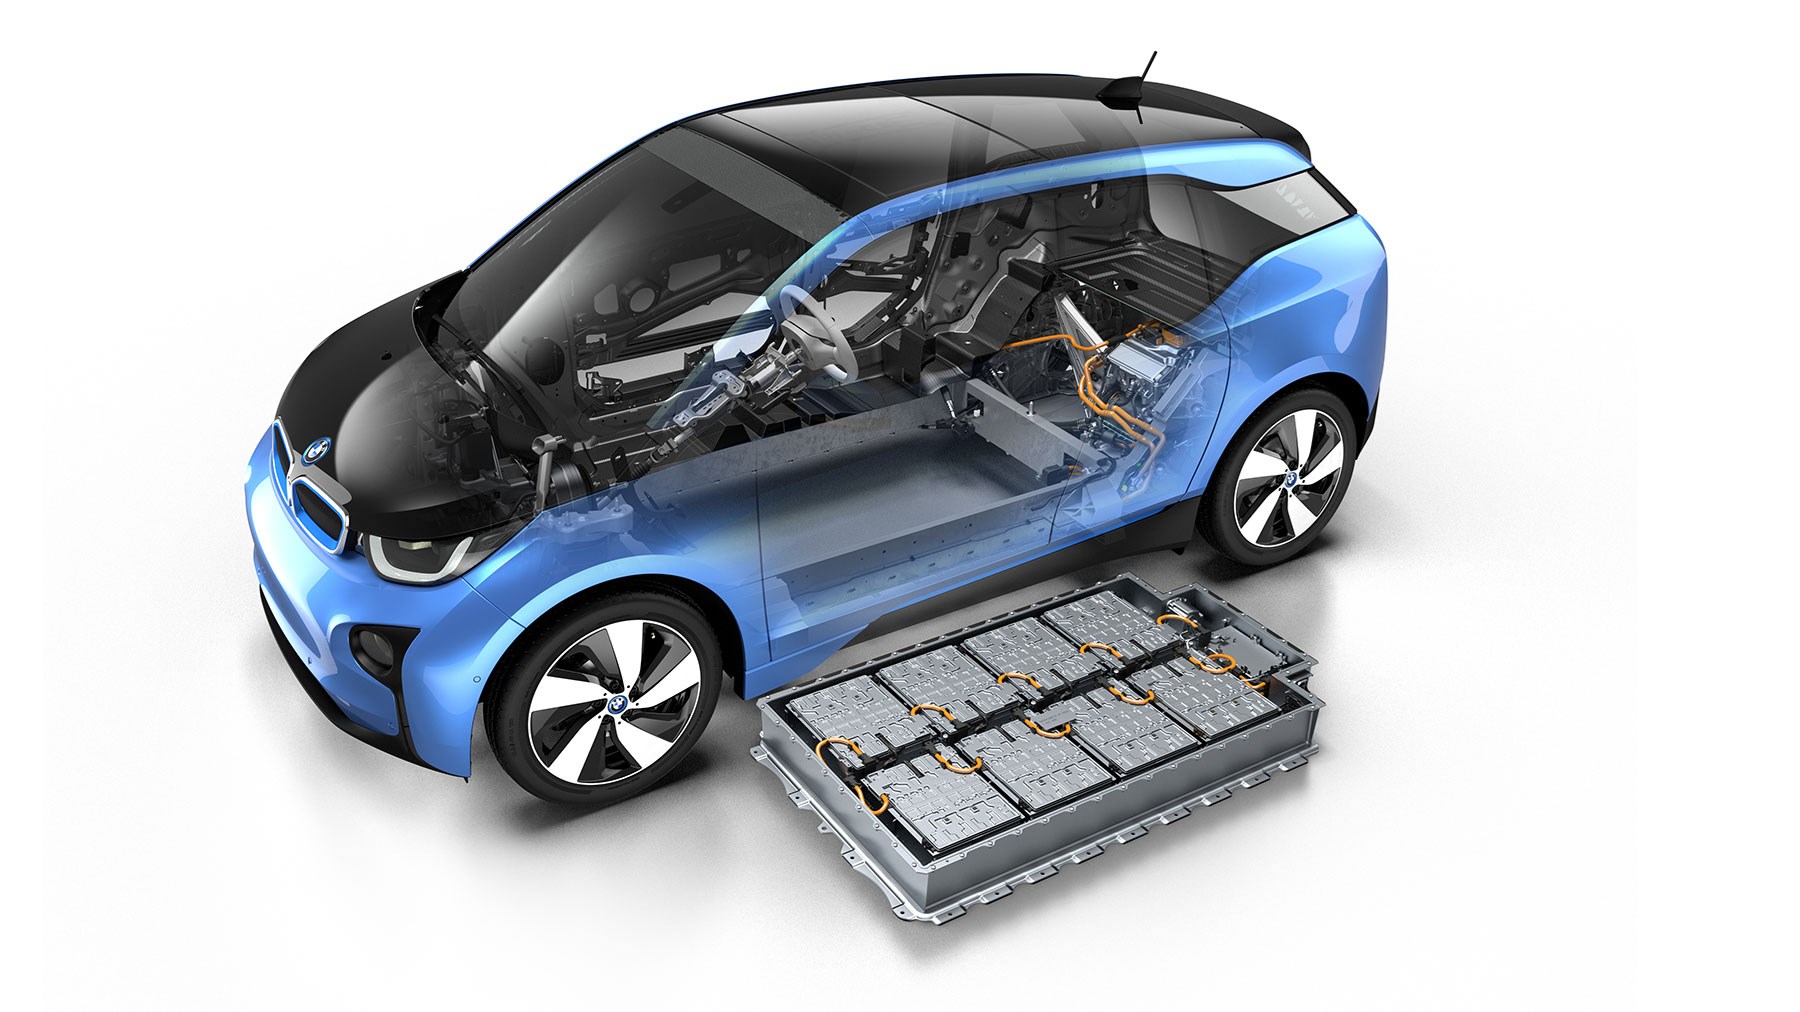 How much is an electric car lithium battery?